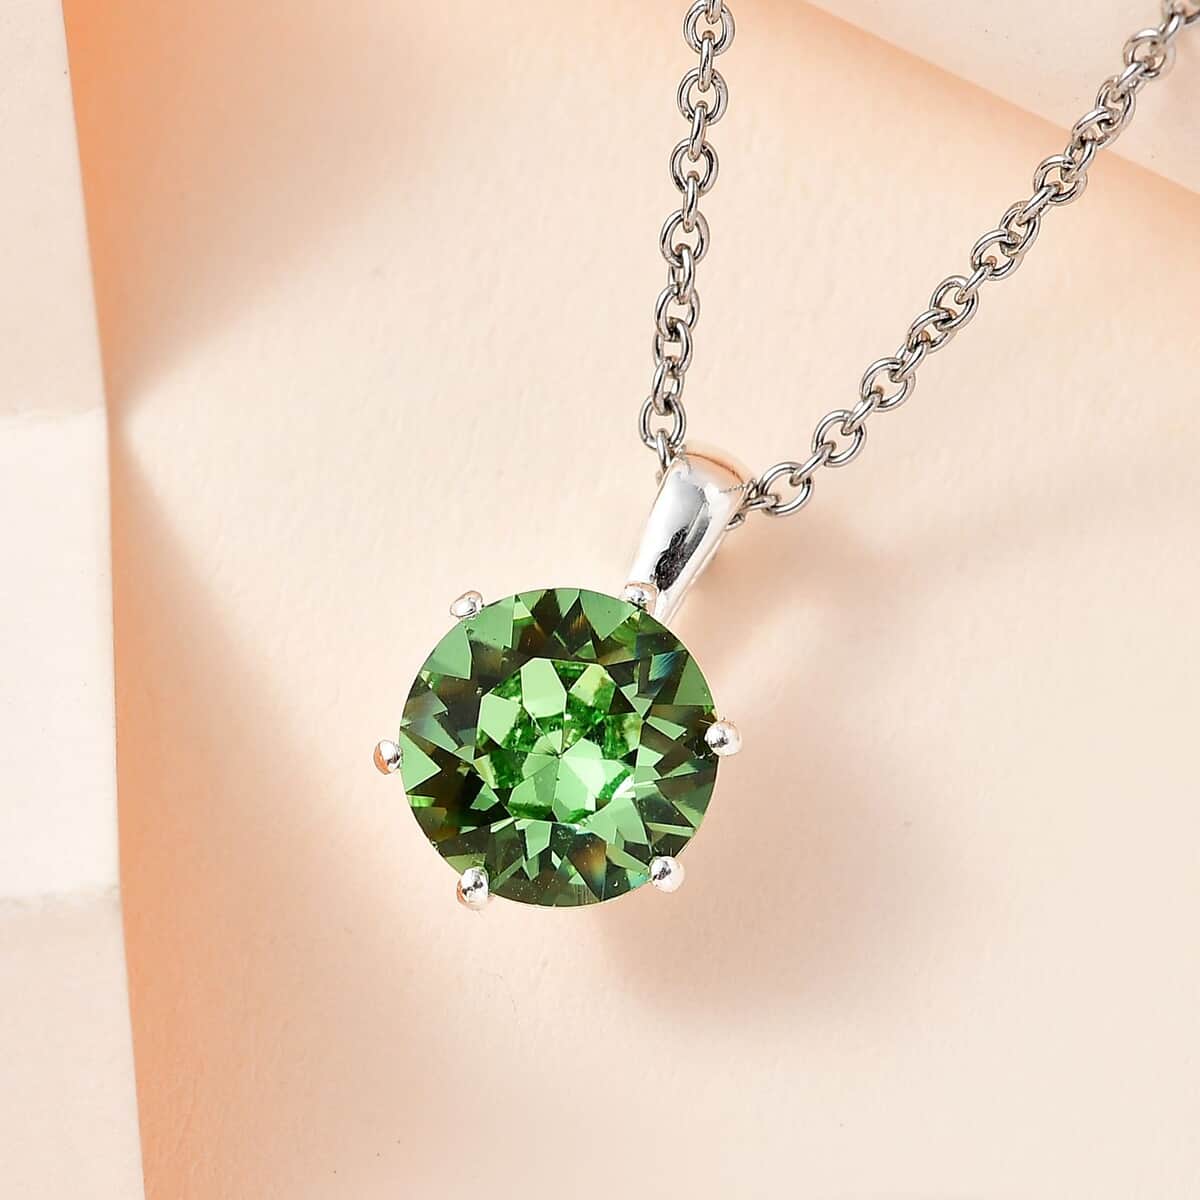 Designer Premium Peridot Color Austrian Crystal Solitaire Pendant in Sterling Silver with Stainless Steel Necklace 20 Inches image number 1